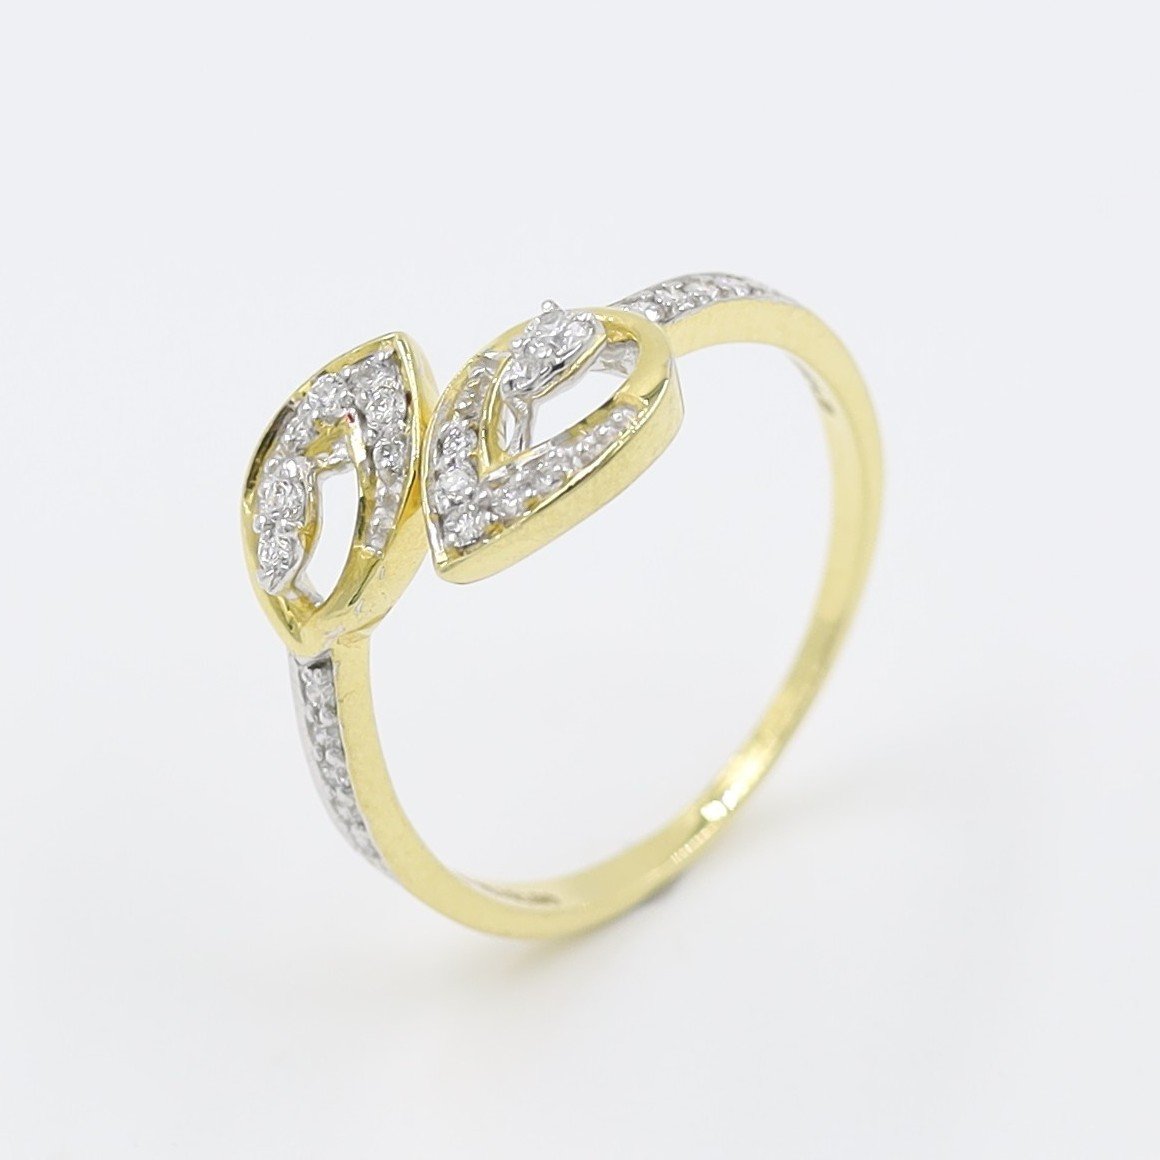 Flawless Leaves Style 14 Karat Gold And Diamond Ring